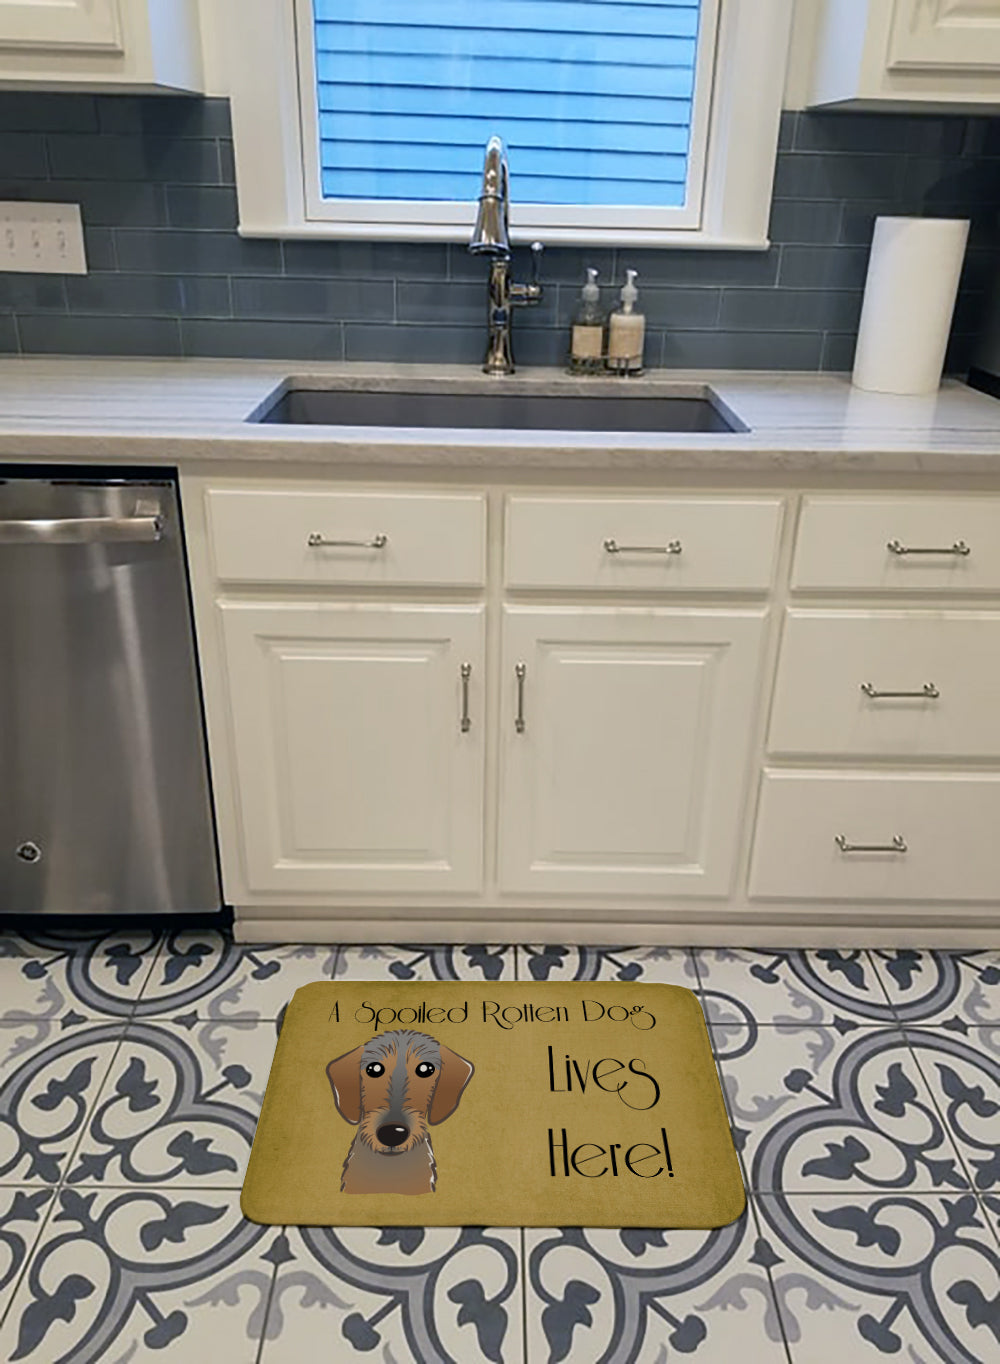 Wirehaired Dachshund Spoiled Dog Lives Here Machine Washable Memory Foam Mat BB1481RUG - the-store.com